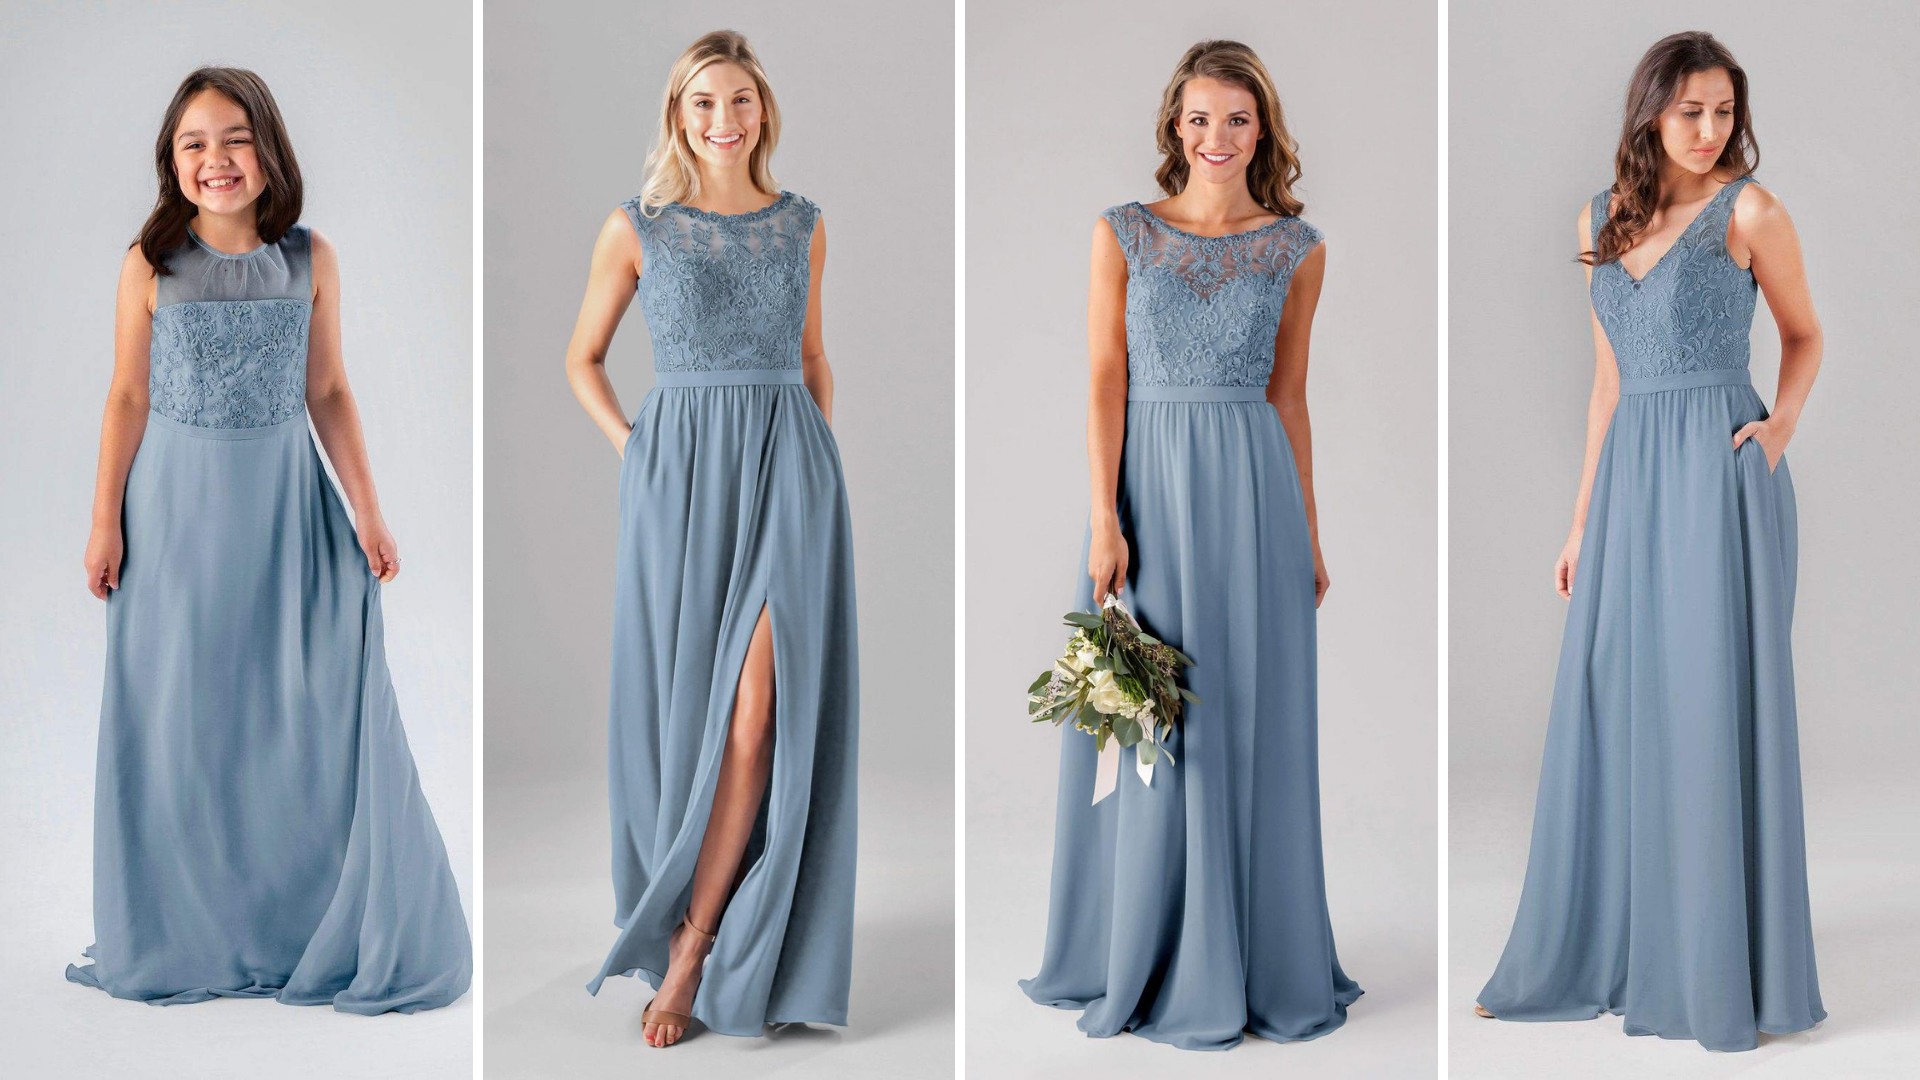 Models wearing Kennedy Blue Bridesmaid Dresses in styles "Riley", "Stassi", and "Fatima".